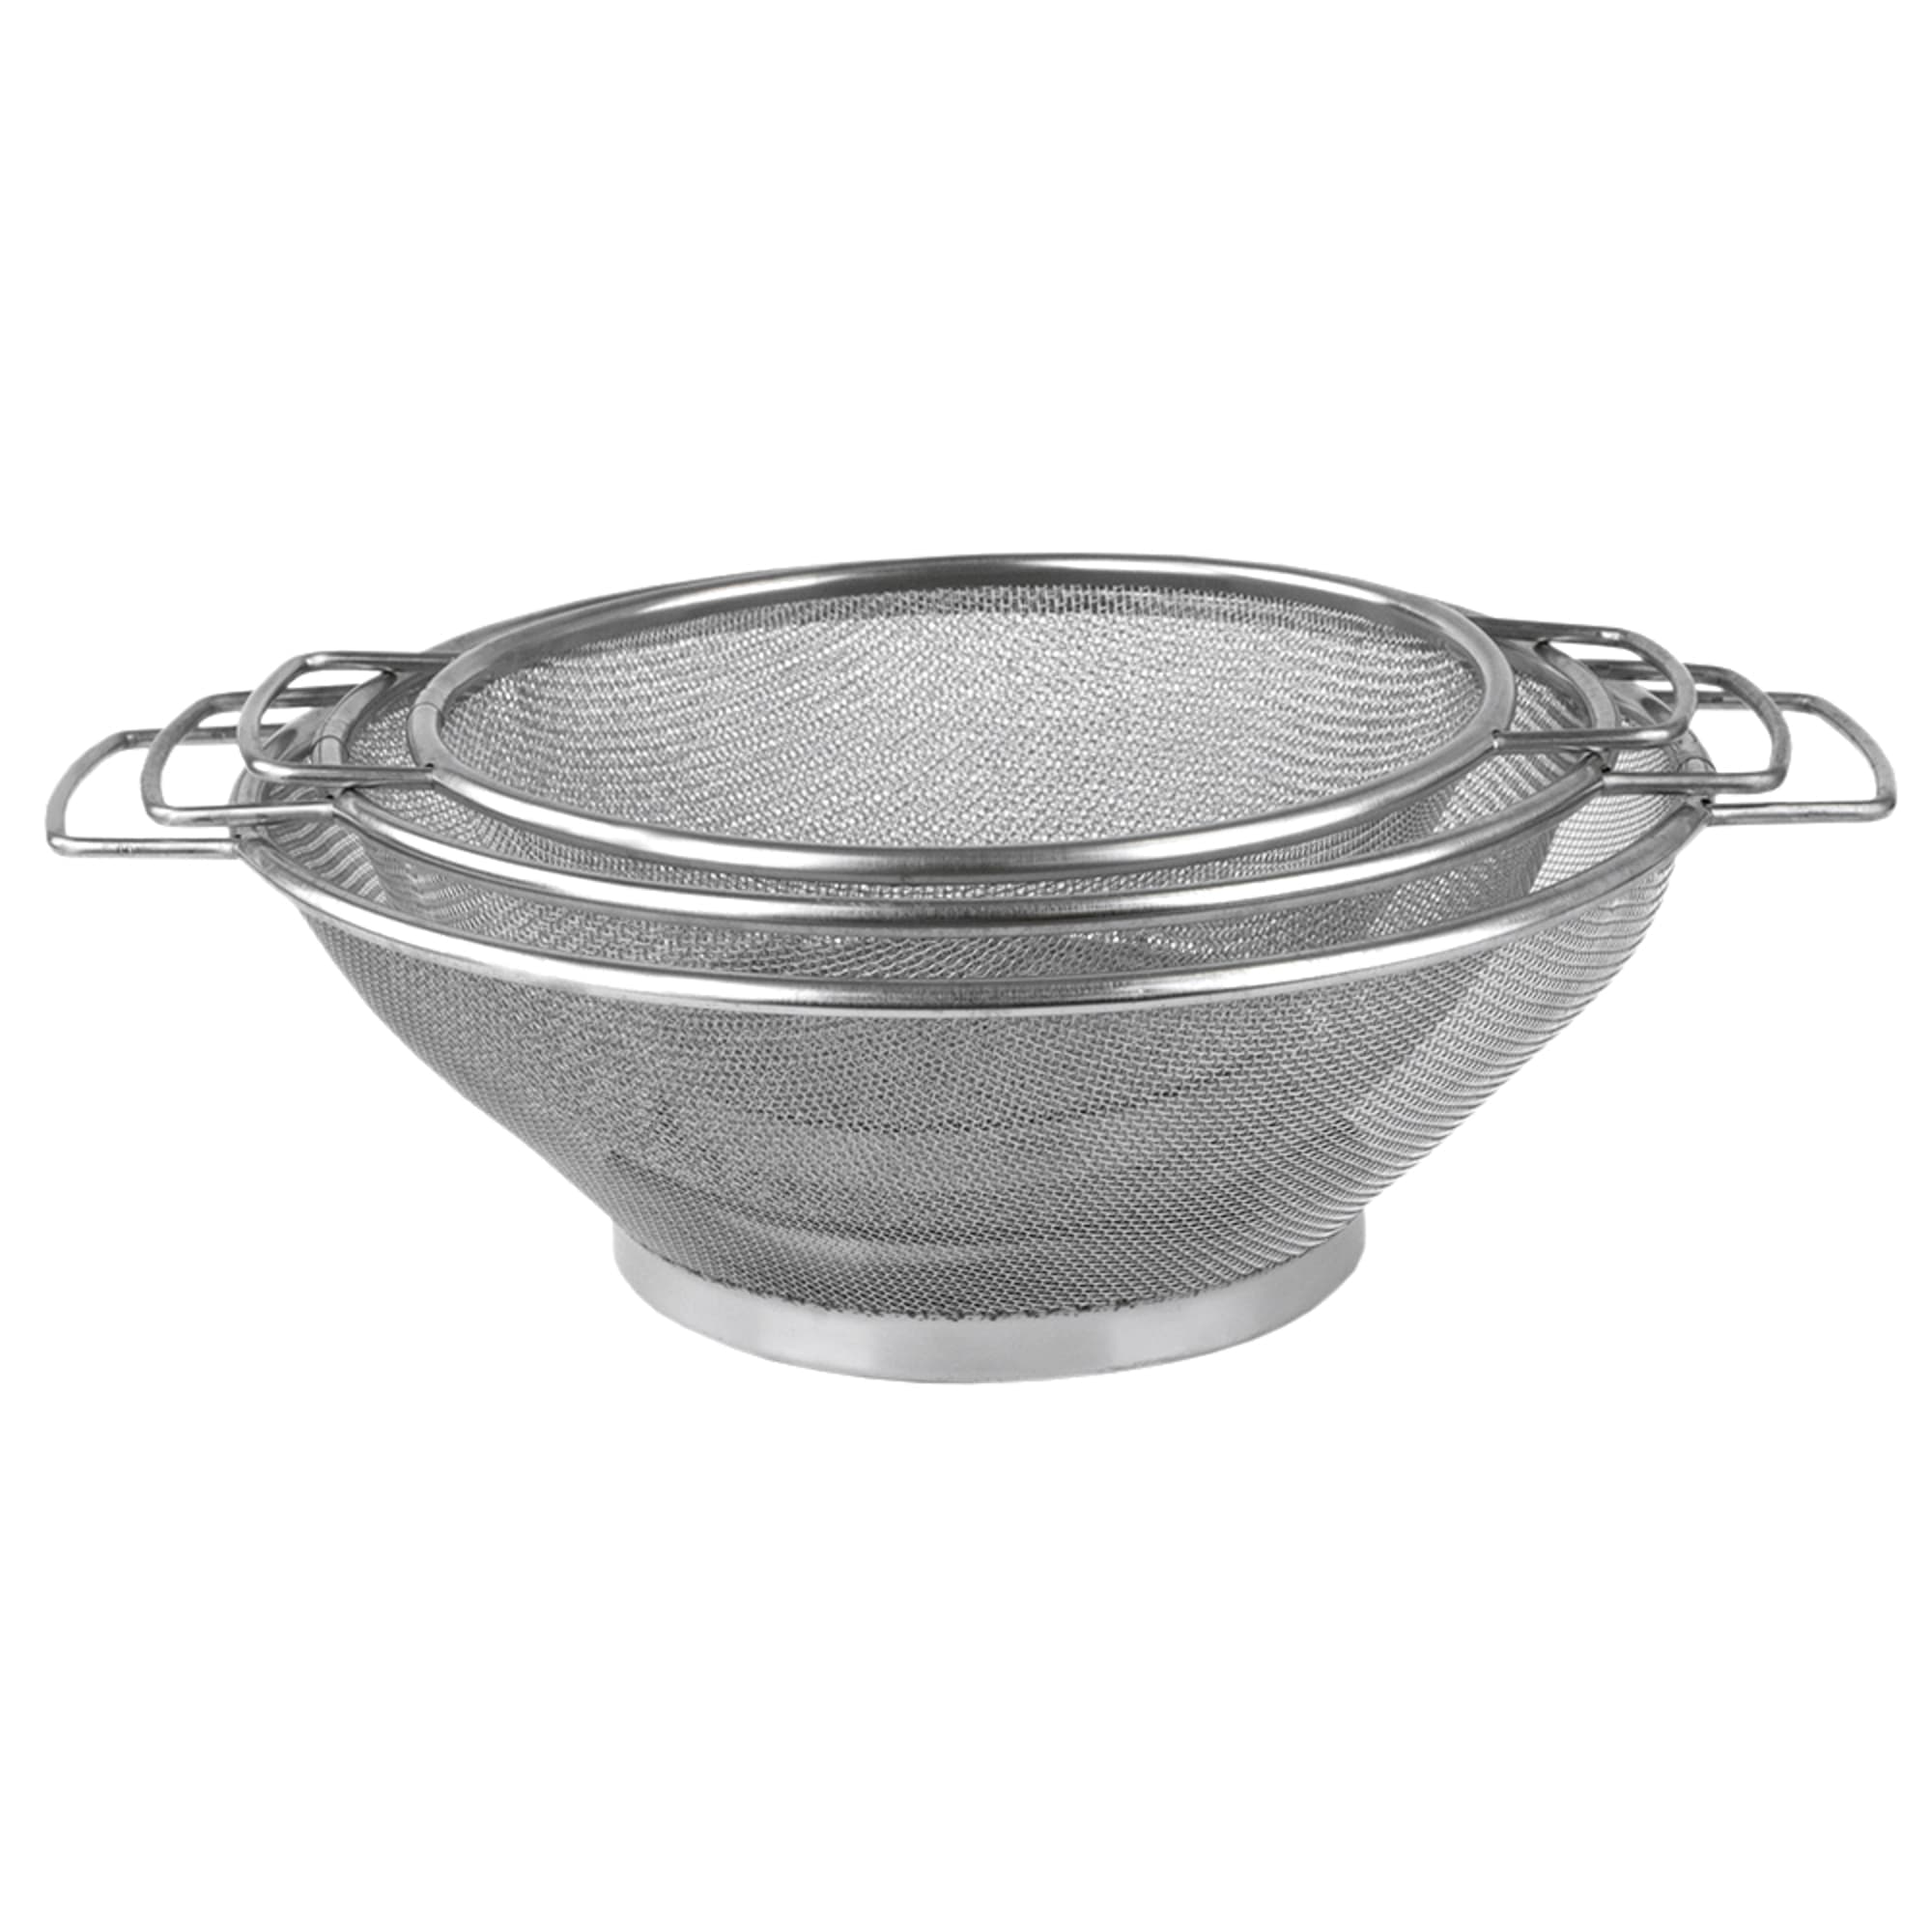 Home Basics Nesting Finely Netted Stainless Steel Mesh Strainer, (Set of 3), Silver $6.00 EACH, CASE PACK OF 12